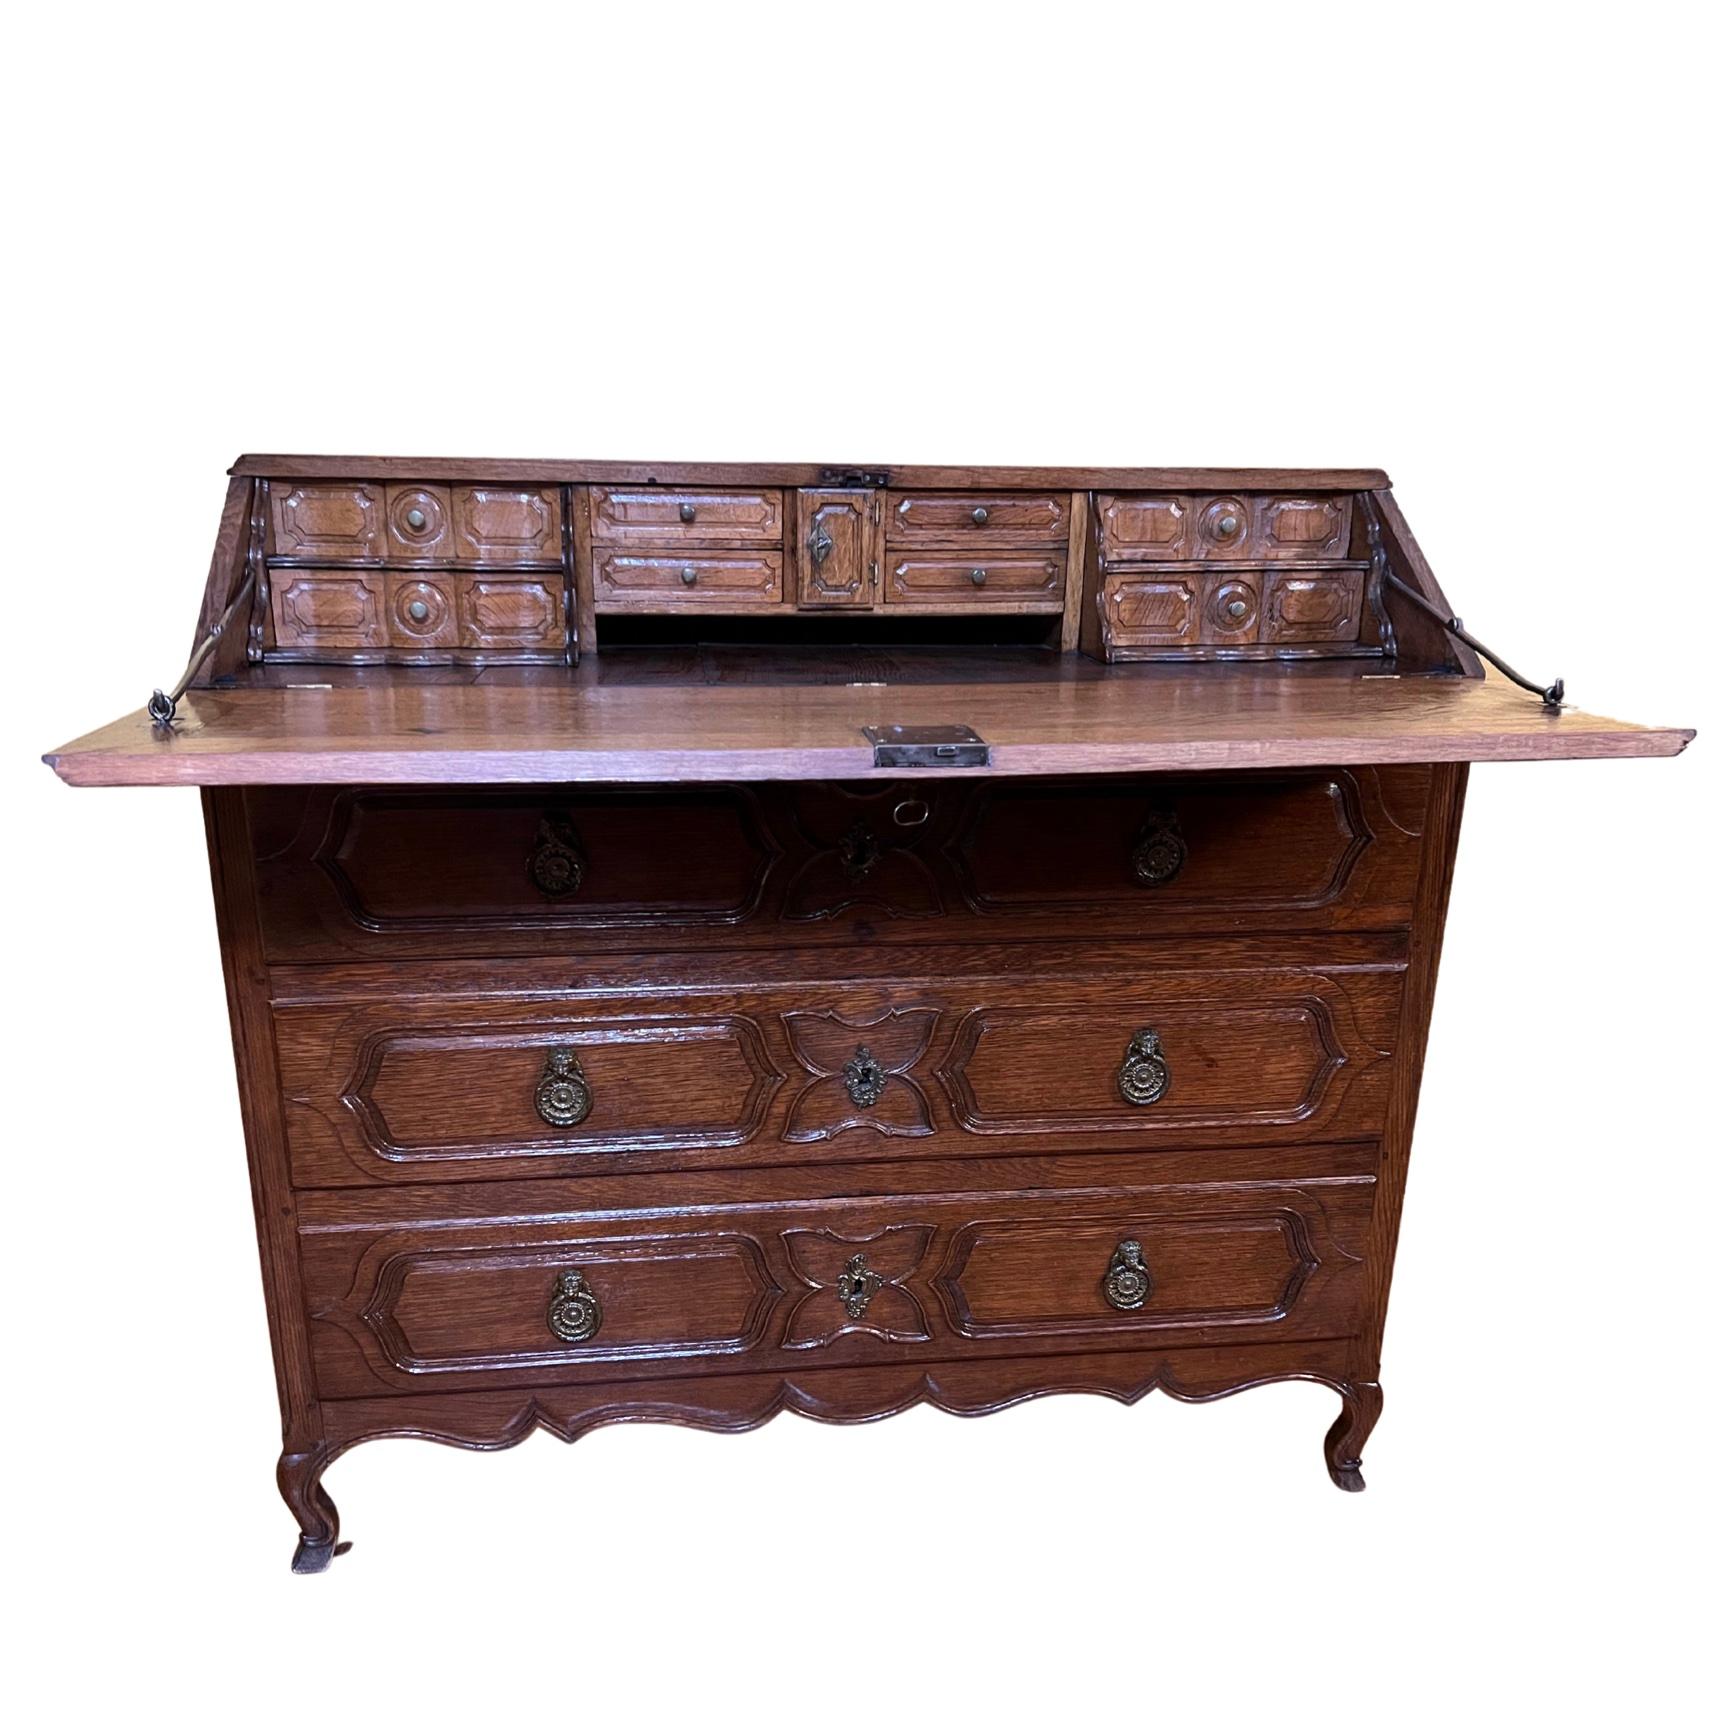 Parquetry detail drop front, when open shows 11 various small drawers, there is a little door that comes with a key that opens up to 3 more mini drawers, base of bureau has three extremely large drawers with pull handles of a lion head. 

Circa: